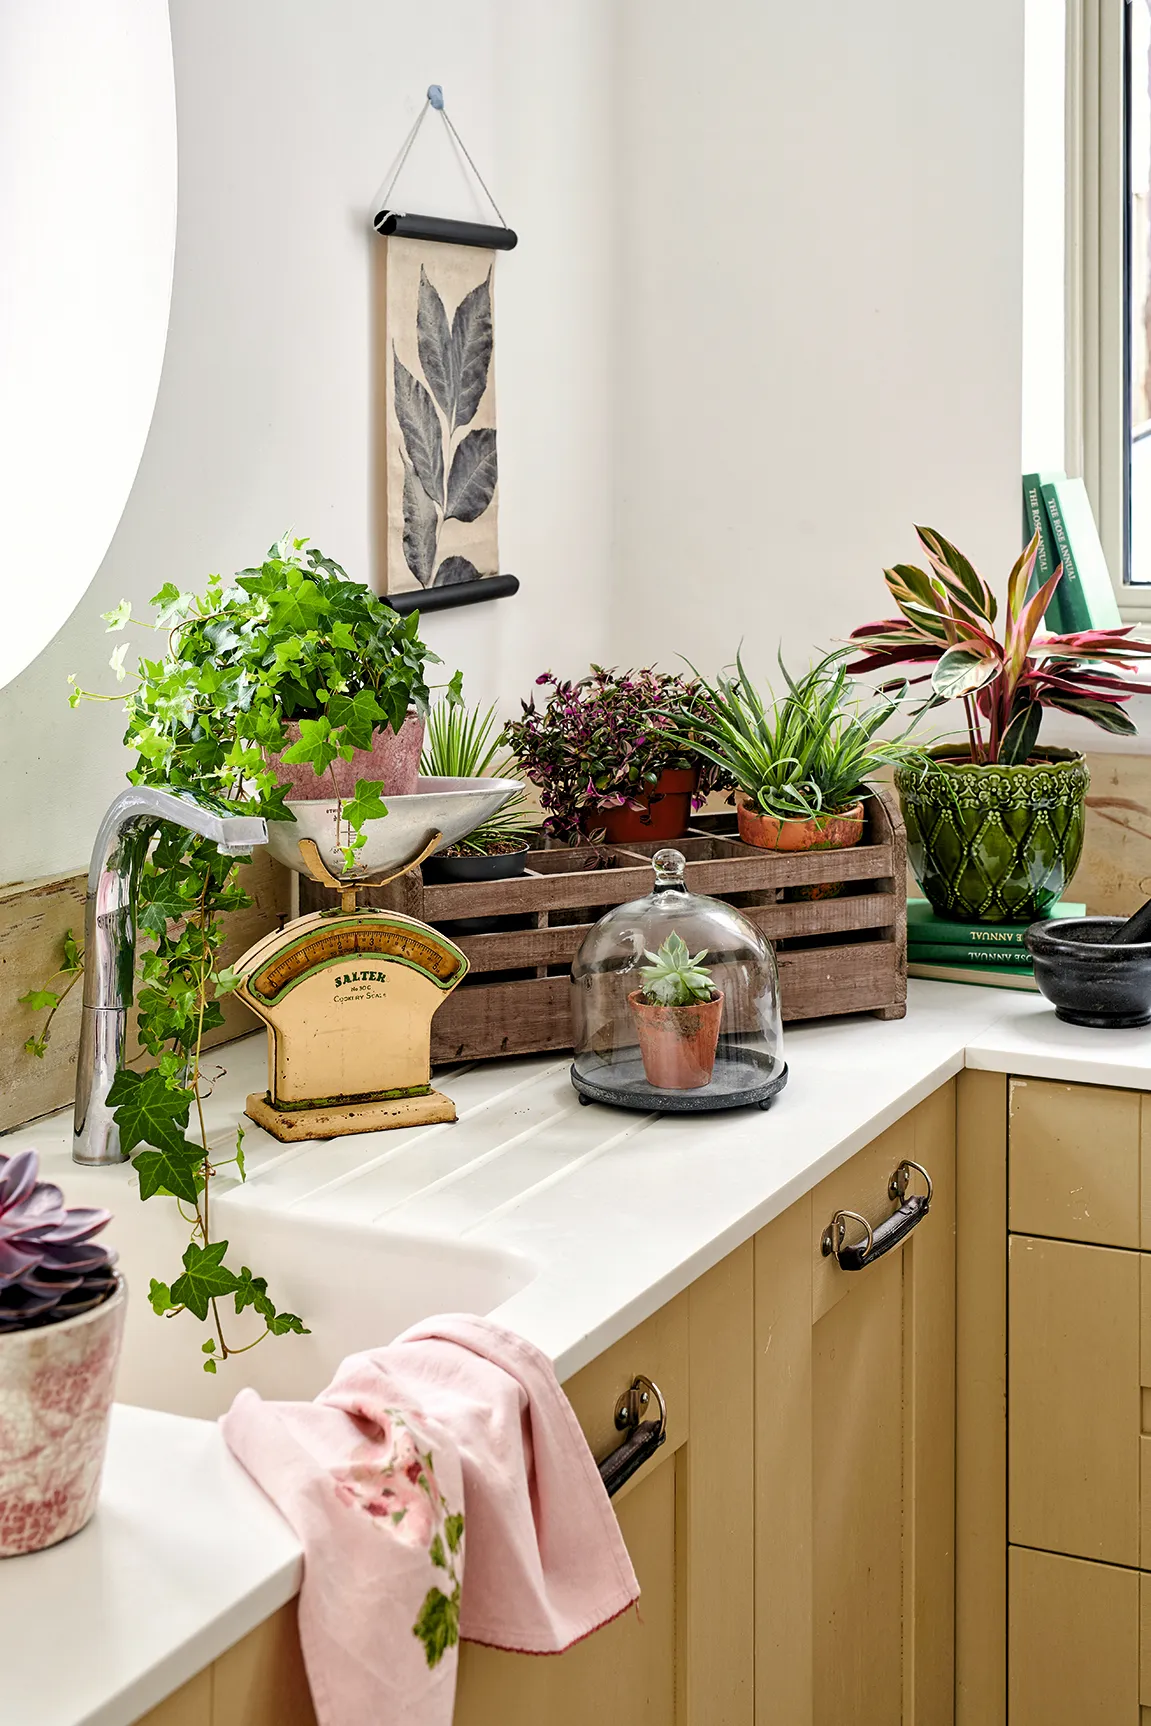 A wooden crate overflowing with plants on a white kitchen worktop.